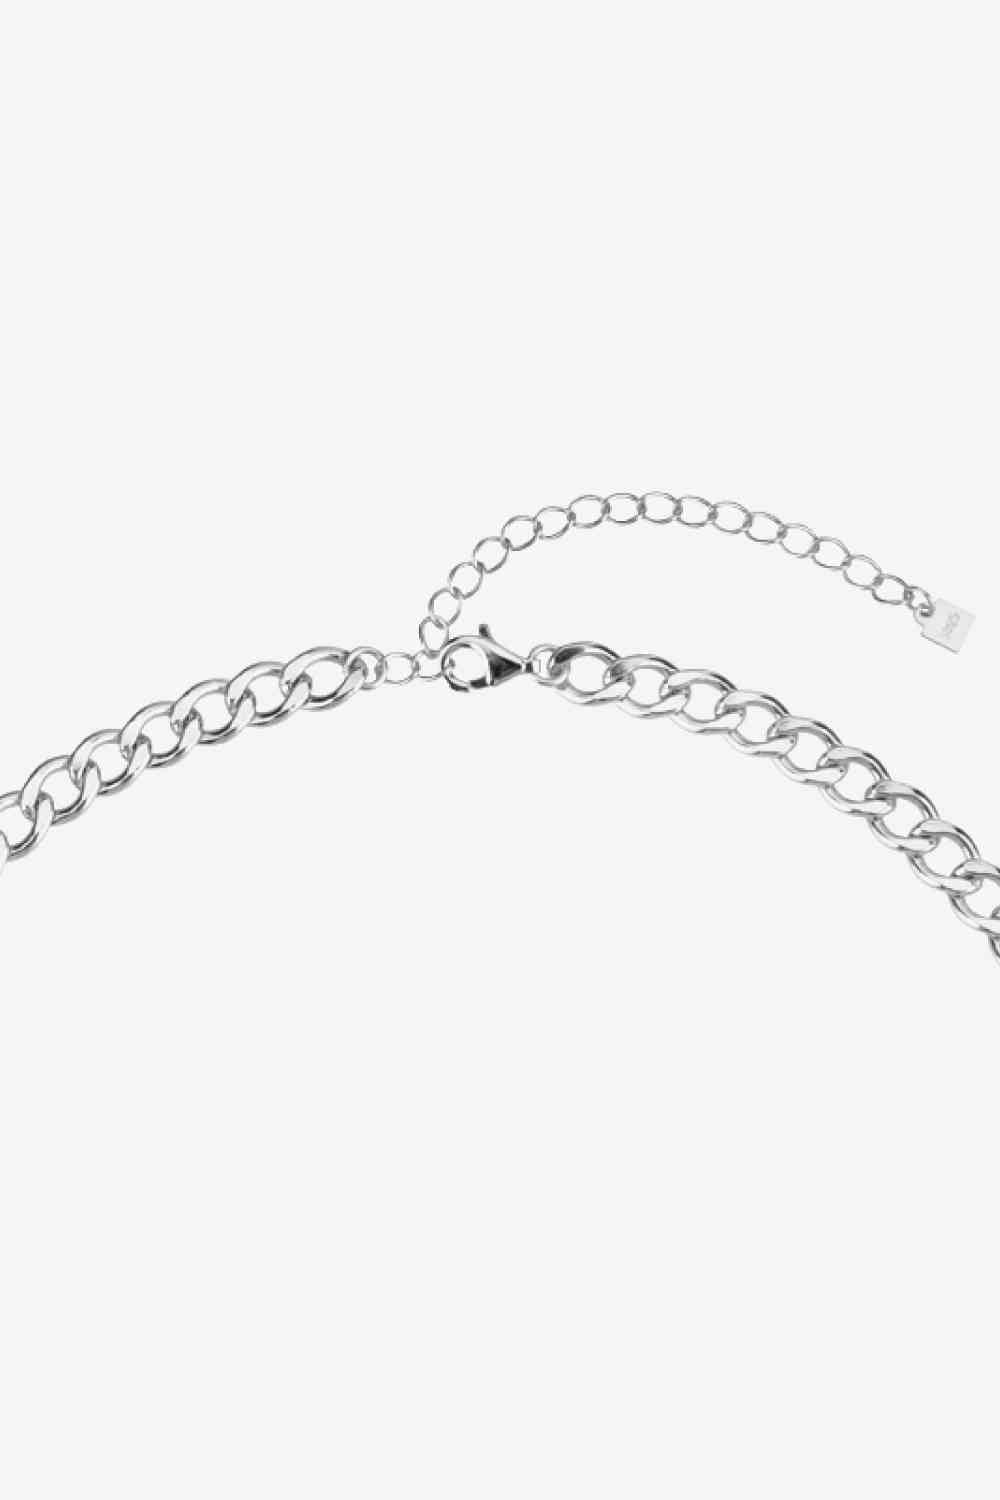 Sterling Silver Gold or Silver Curb Chain Necklace 14"